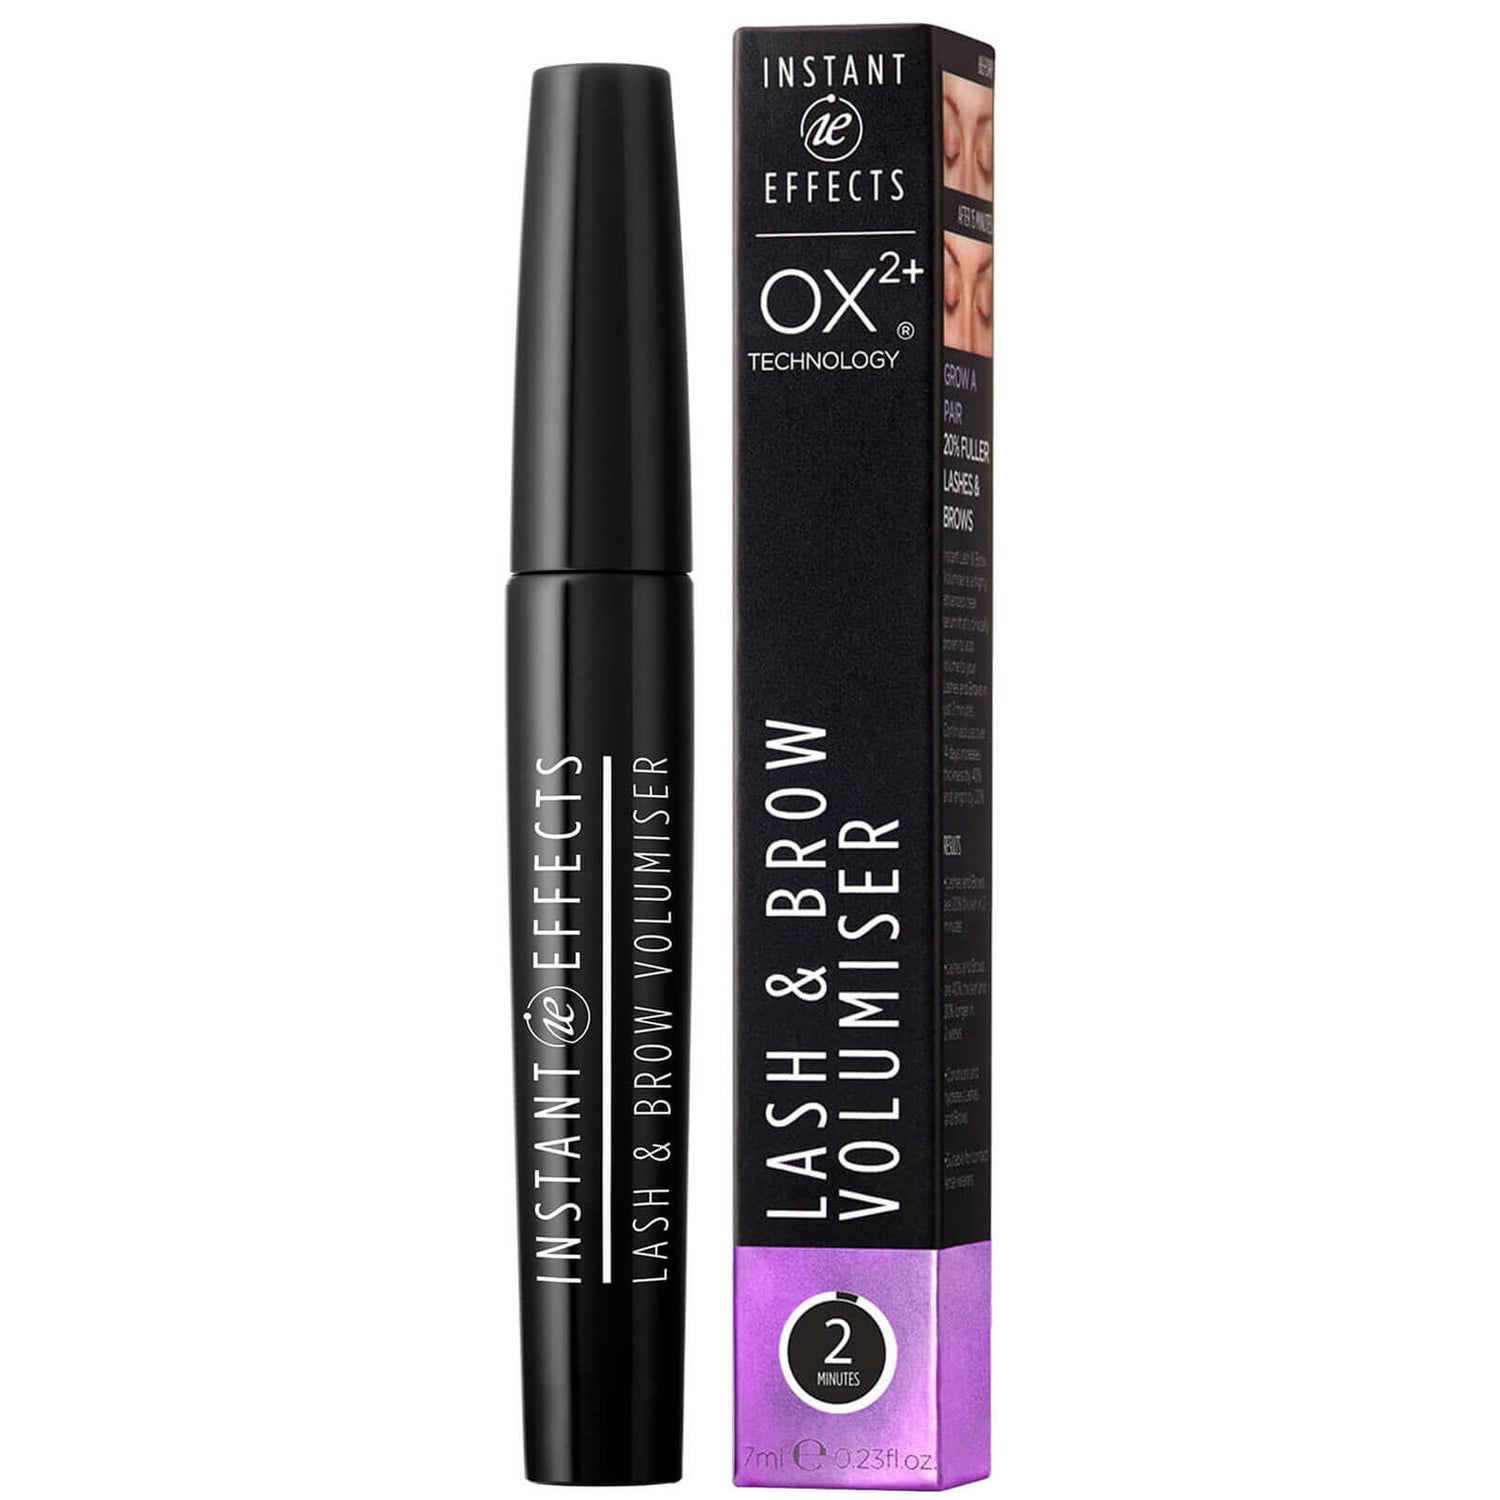 Instant Effects Instant Lash and Brow Volumizer